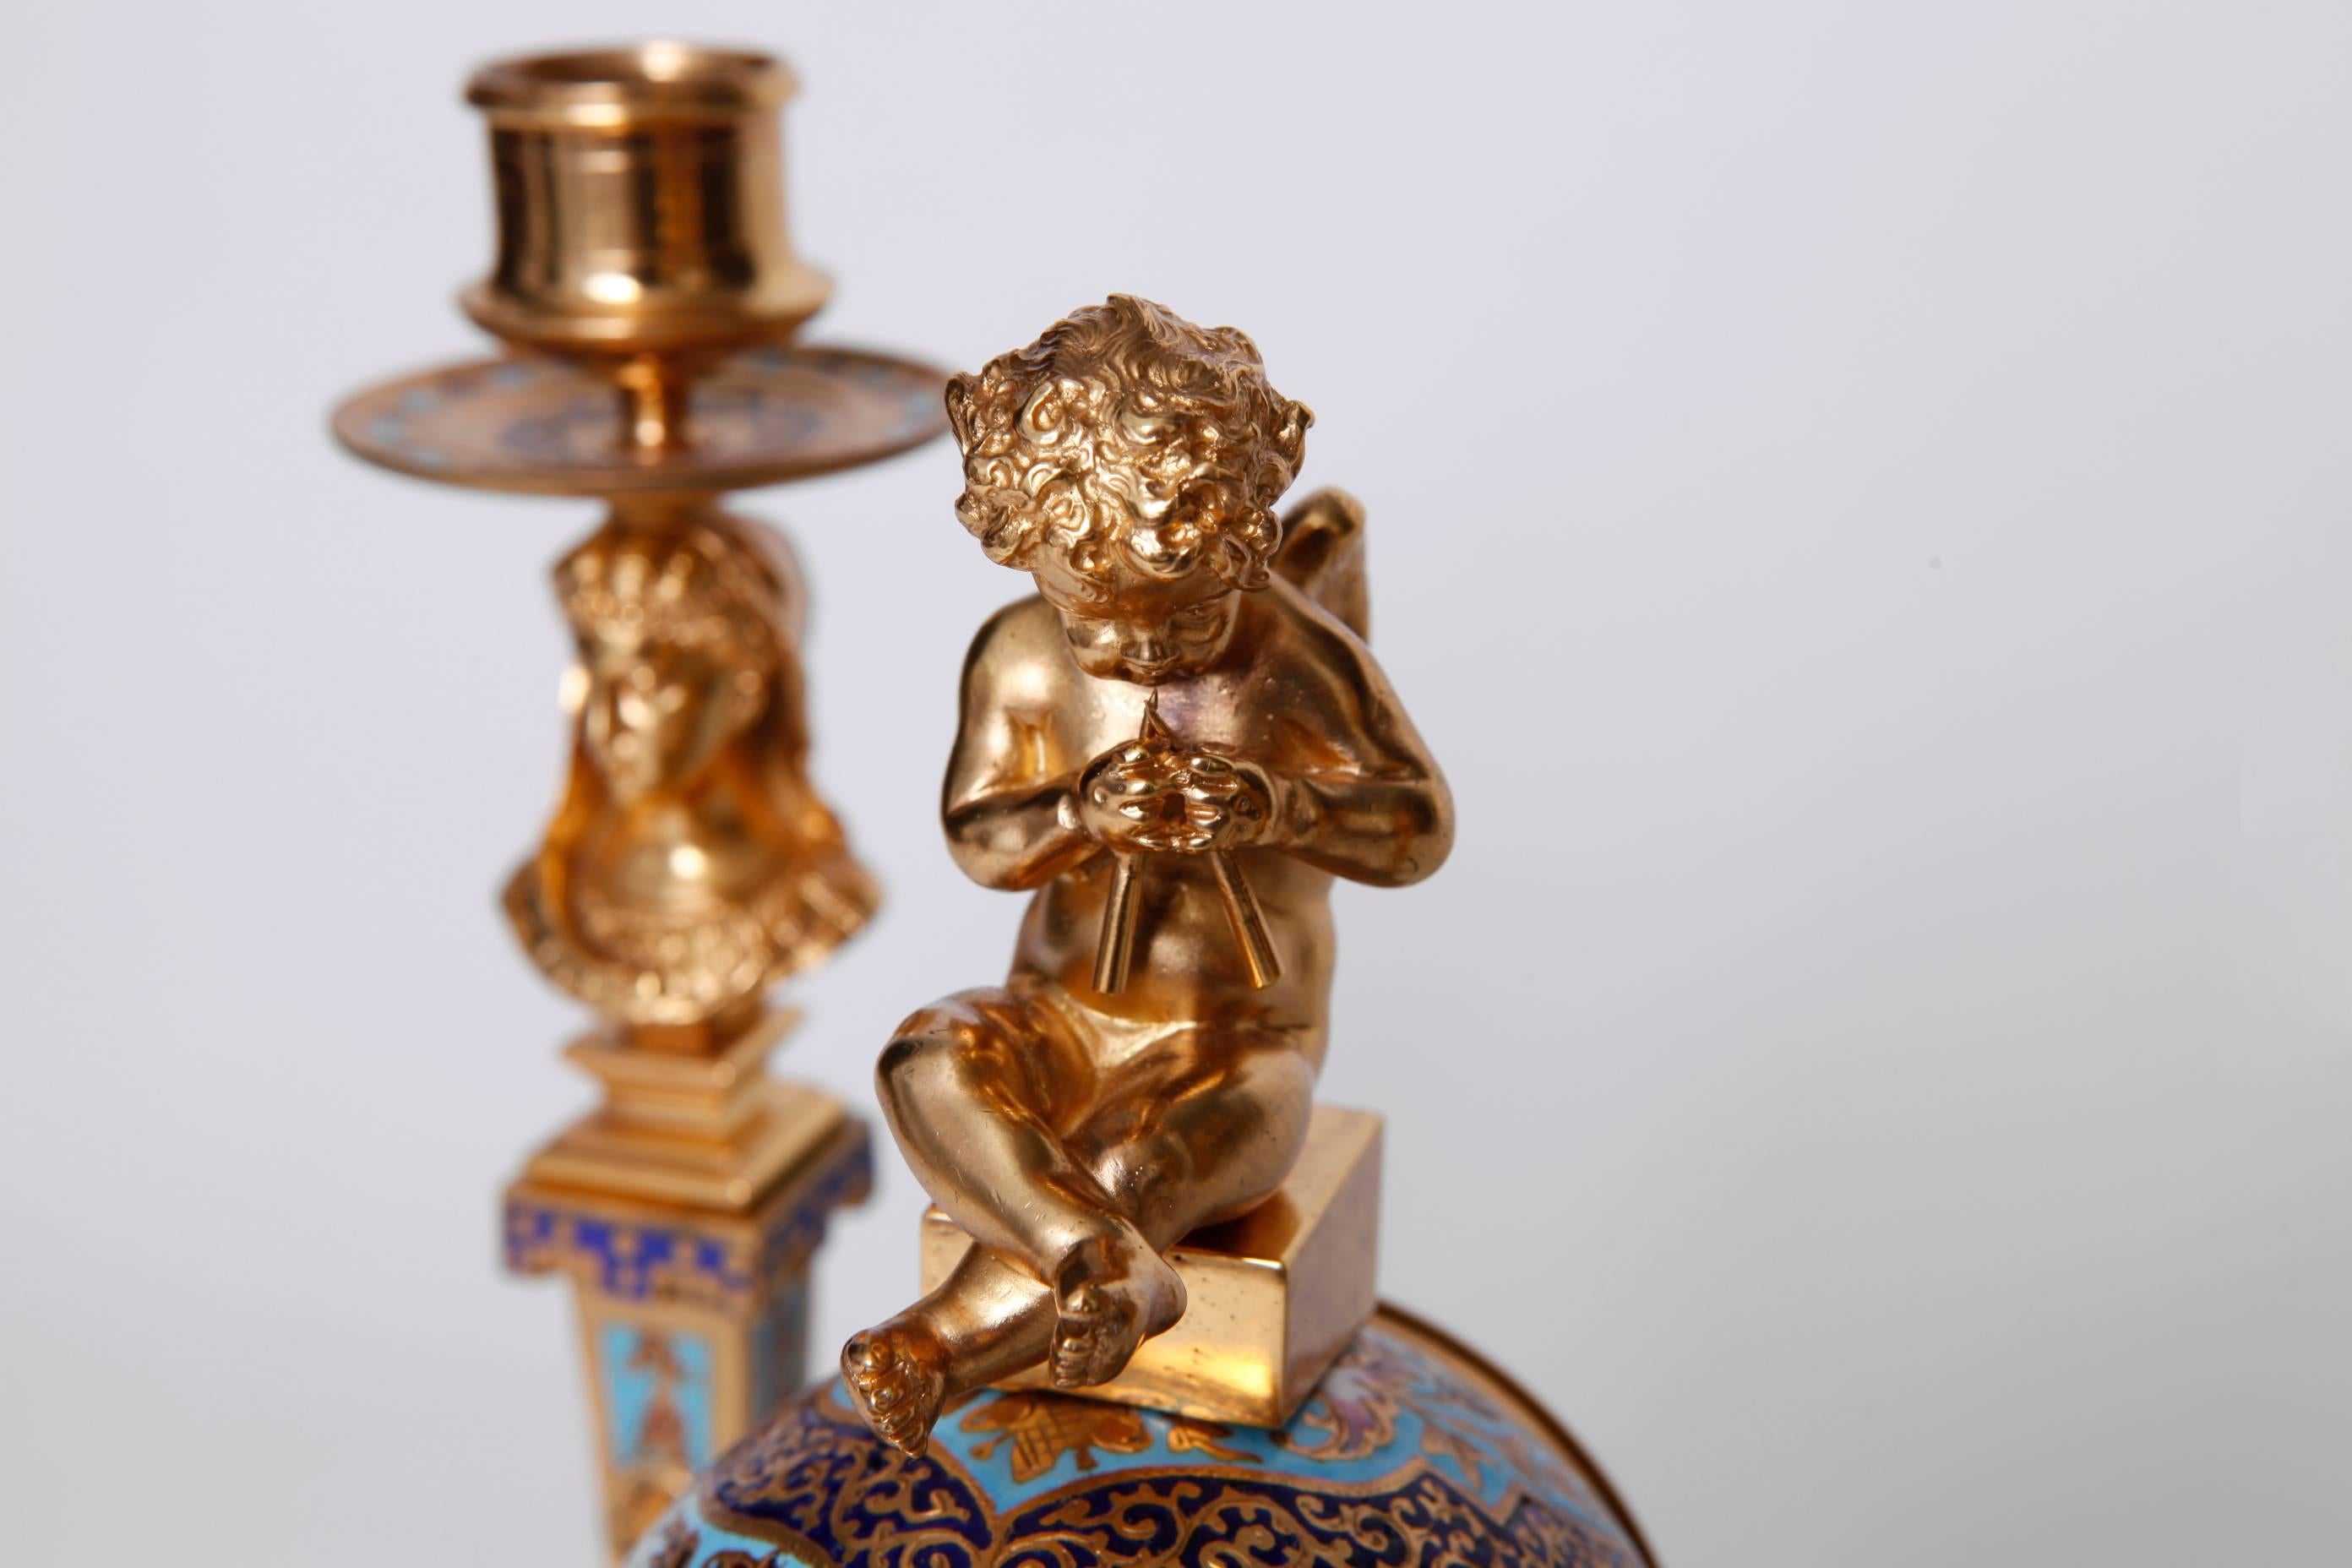 French Champleve Gilt Bronze and Enamel Clock Garniture
three piece set . Includes clock and a pair of candlesticks
Paris - France, c. 1880s

candlesticks - h 9.75 in; diam 4.5 in
clock - 10 in; Diam 3.5 in.
